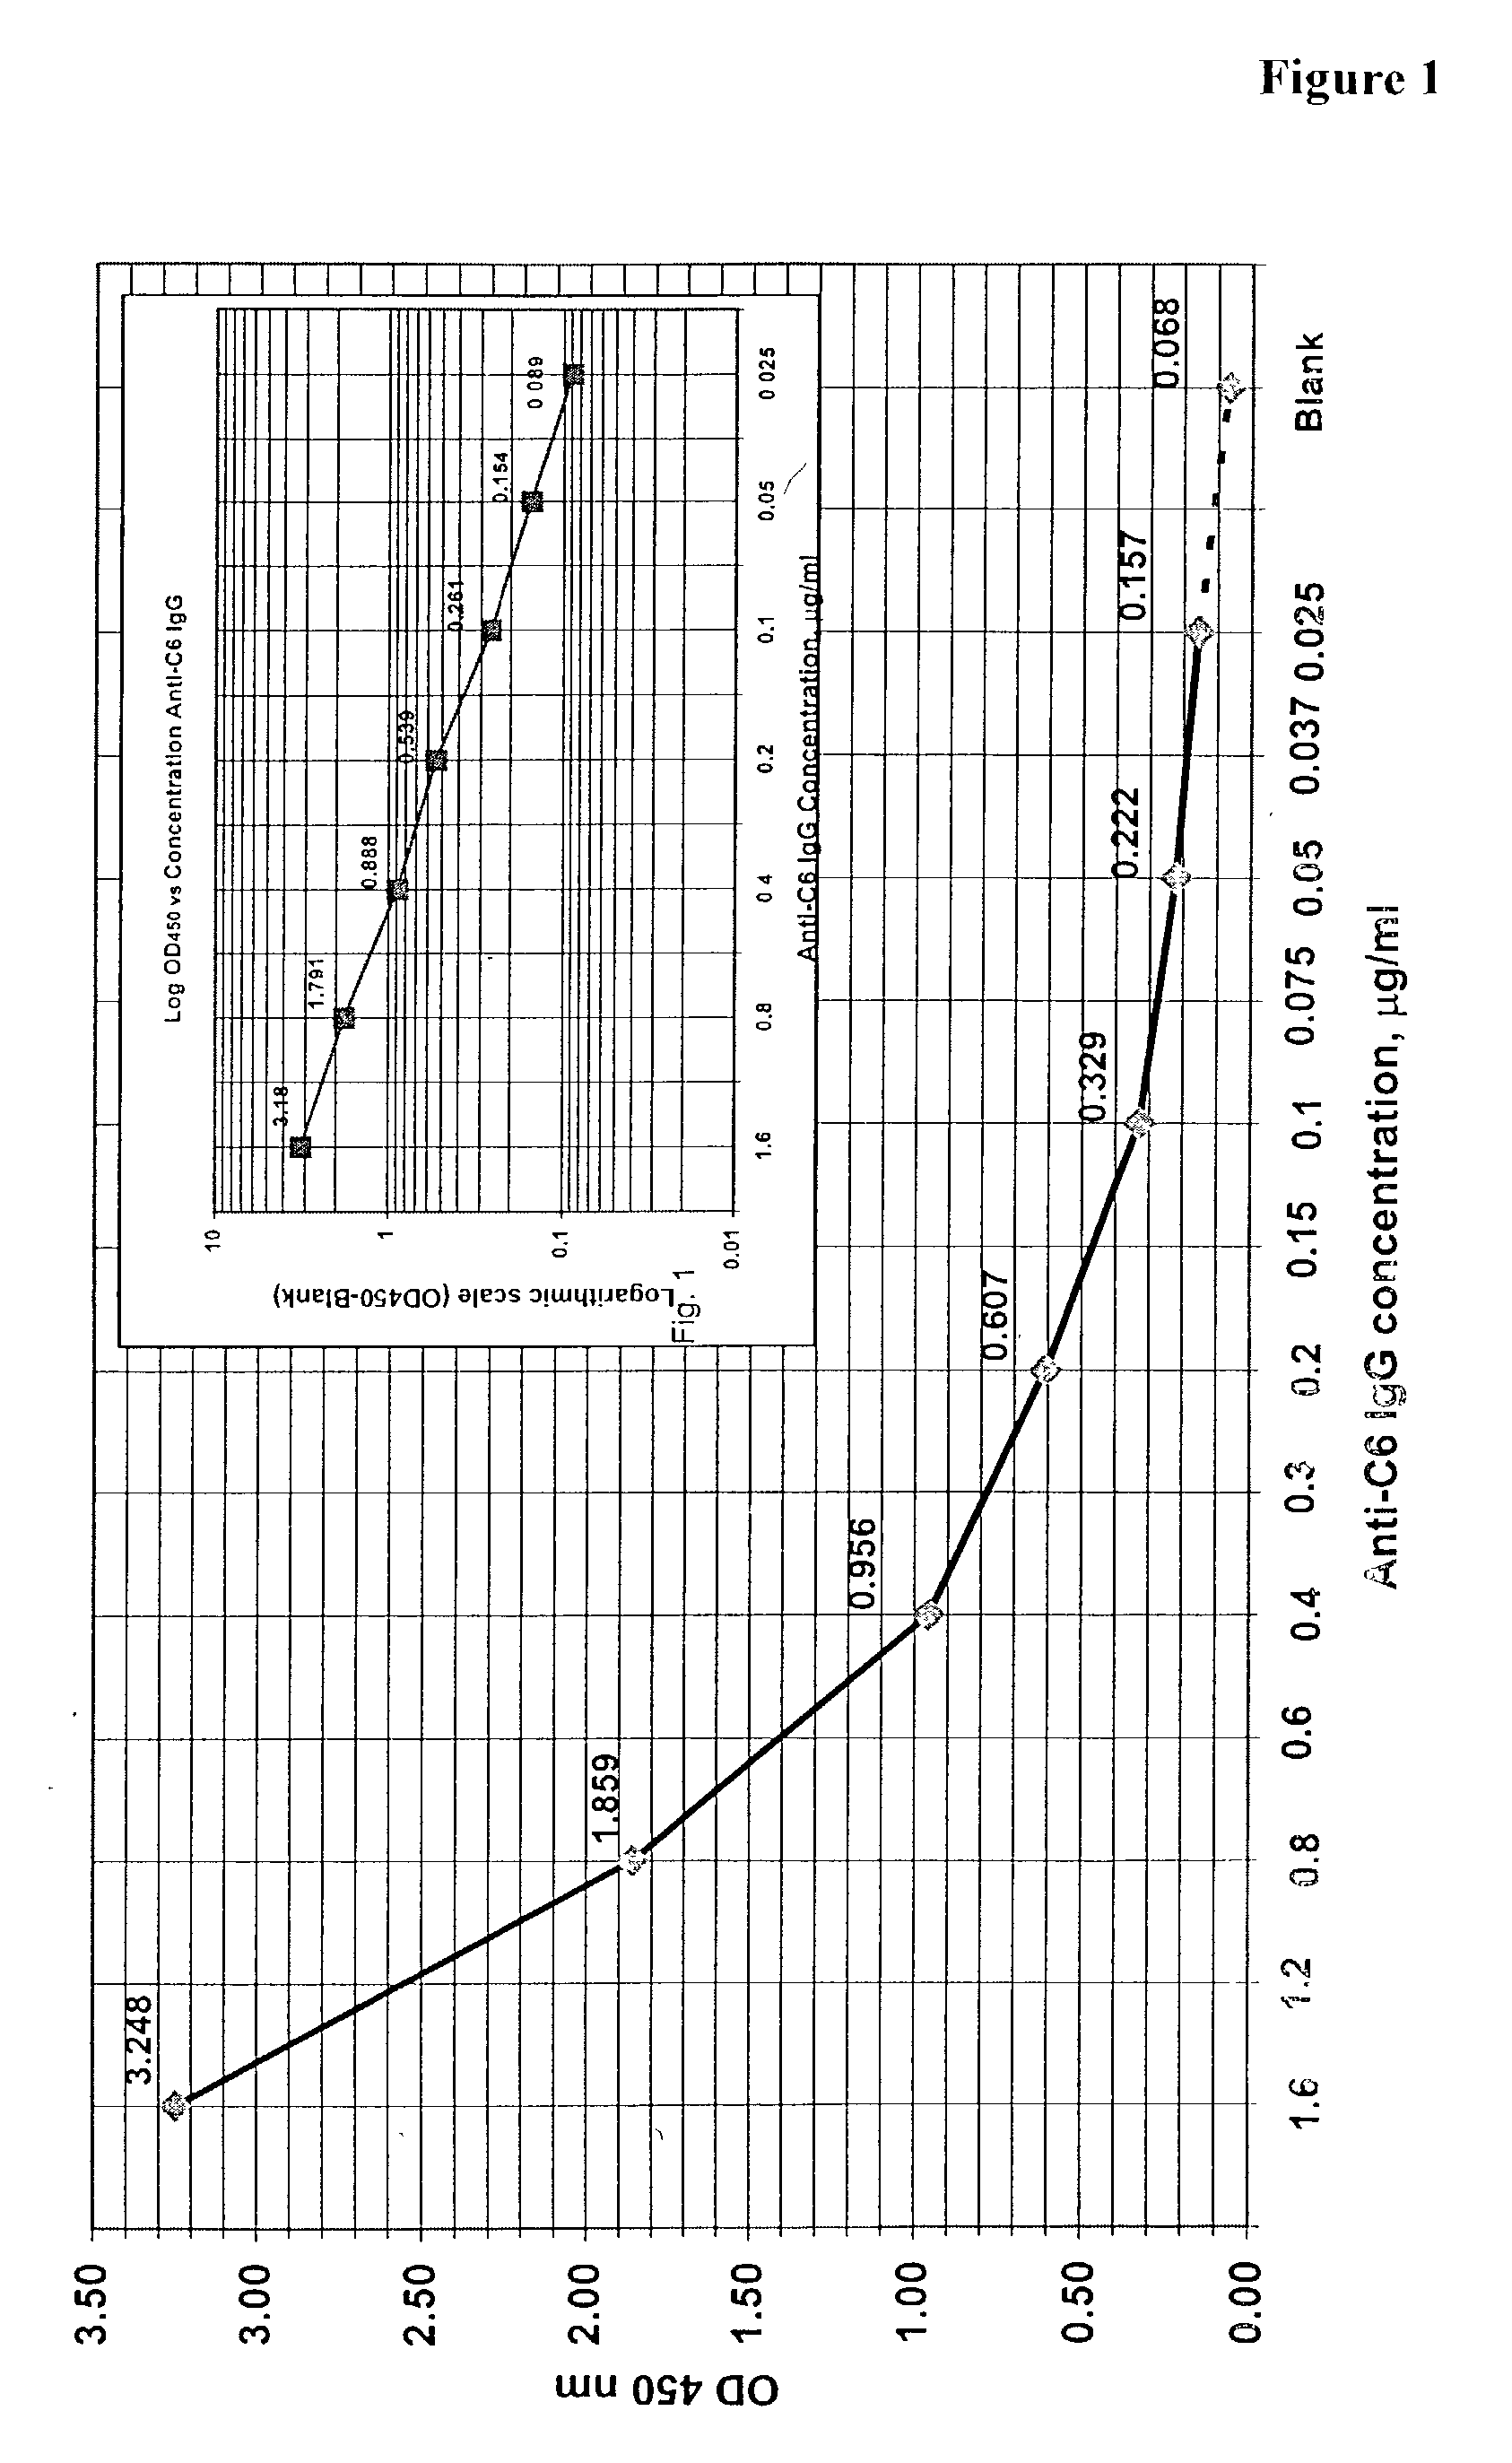 Systems and methods for detection of analytes in biological fluids